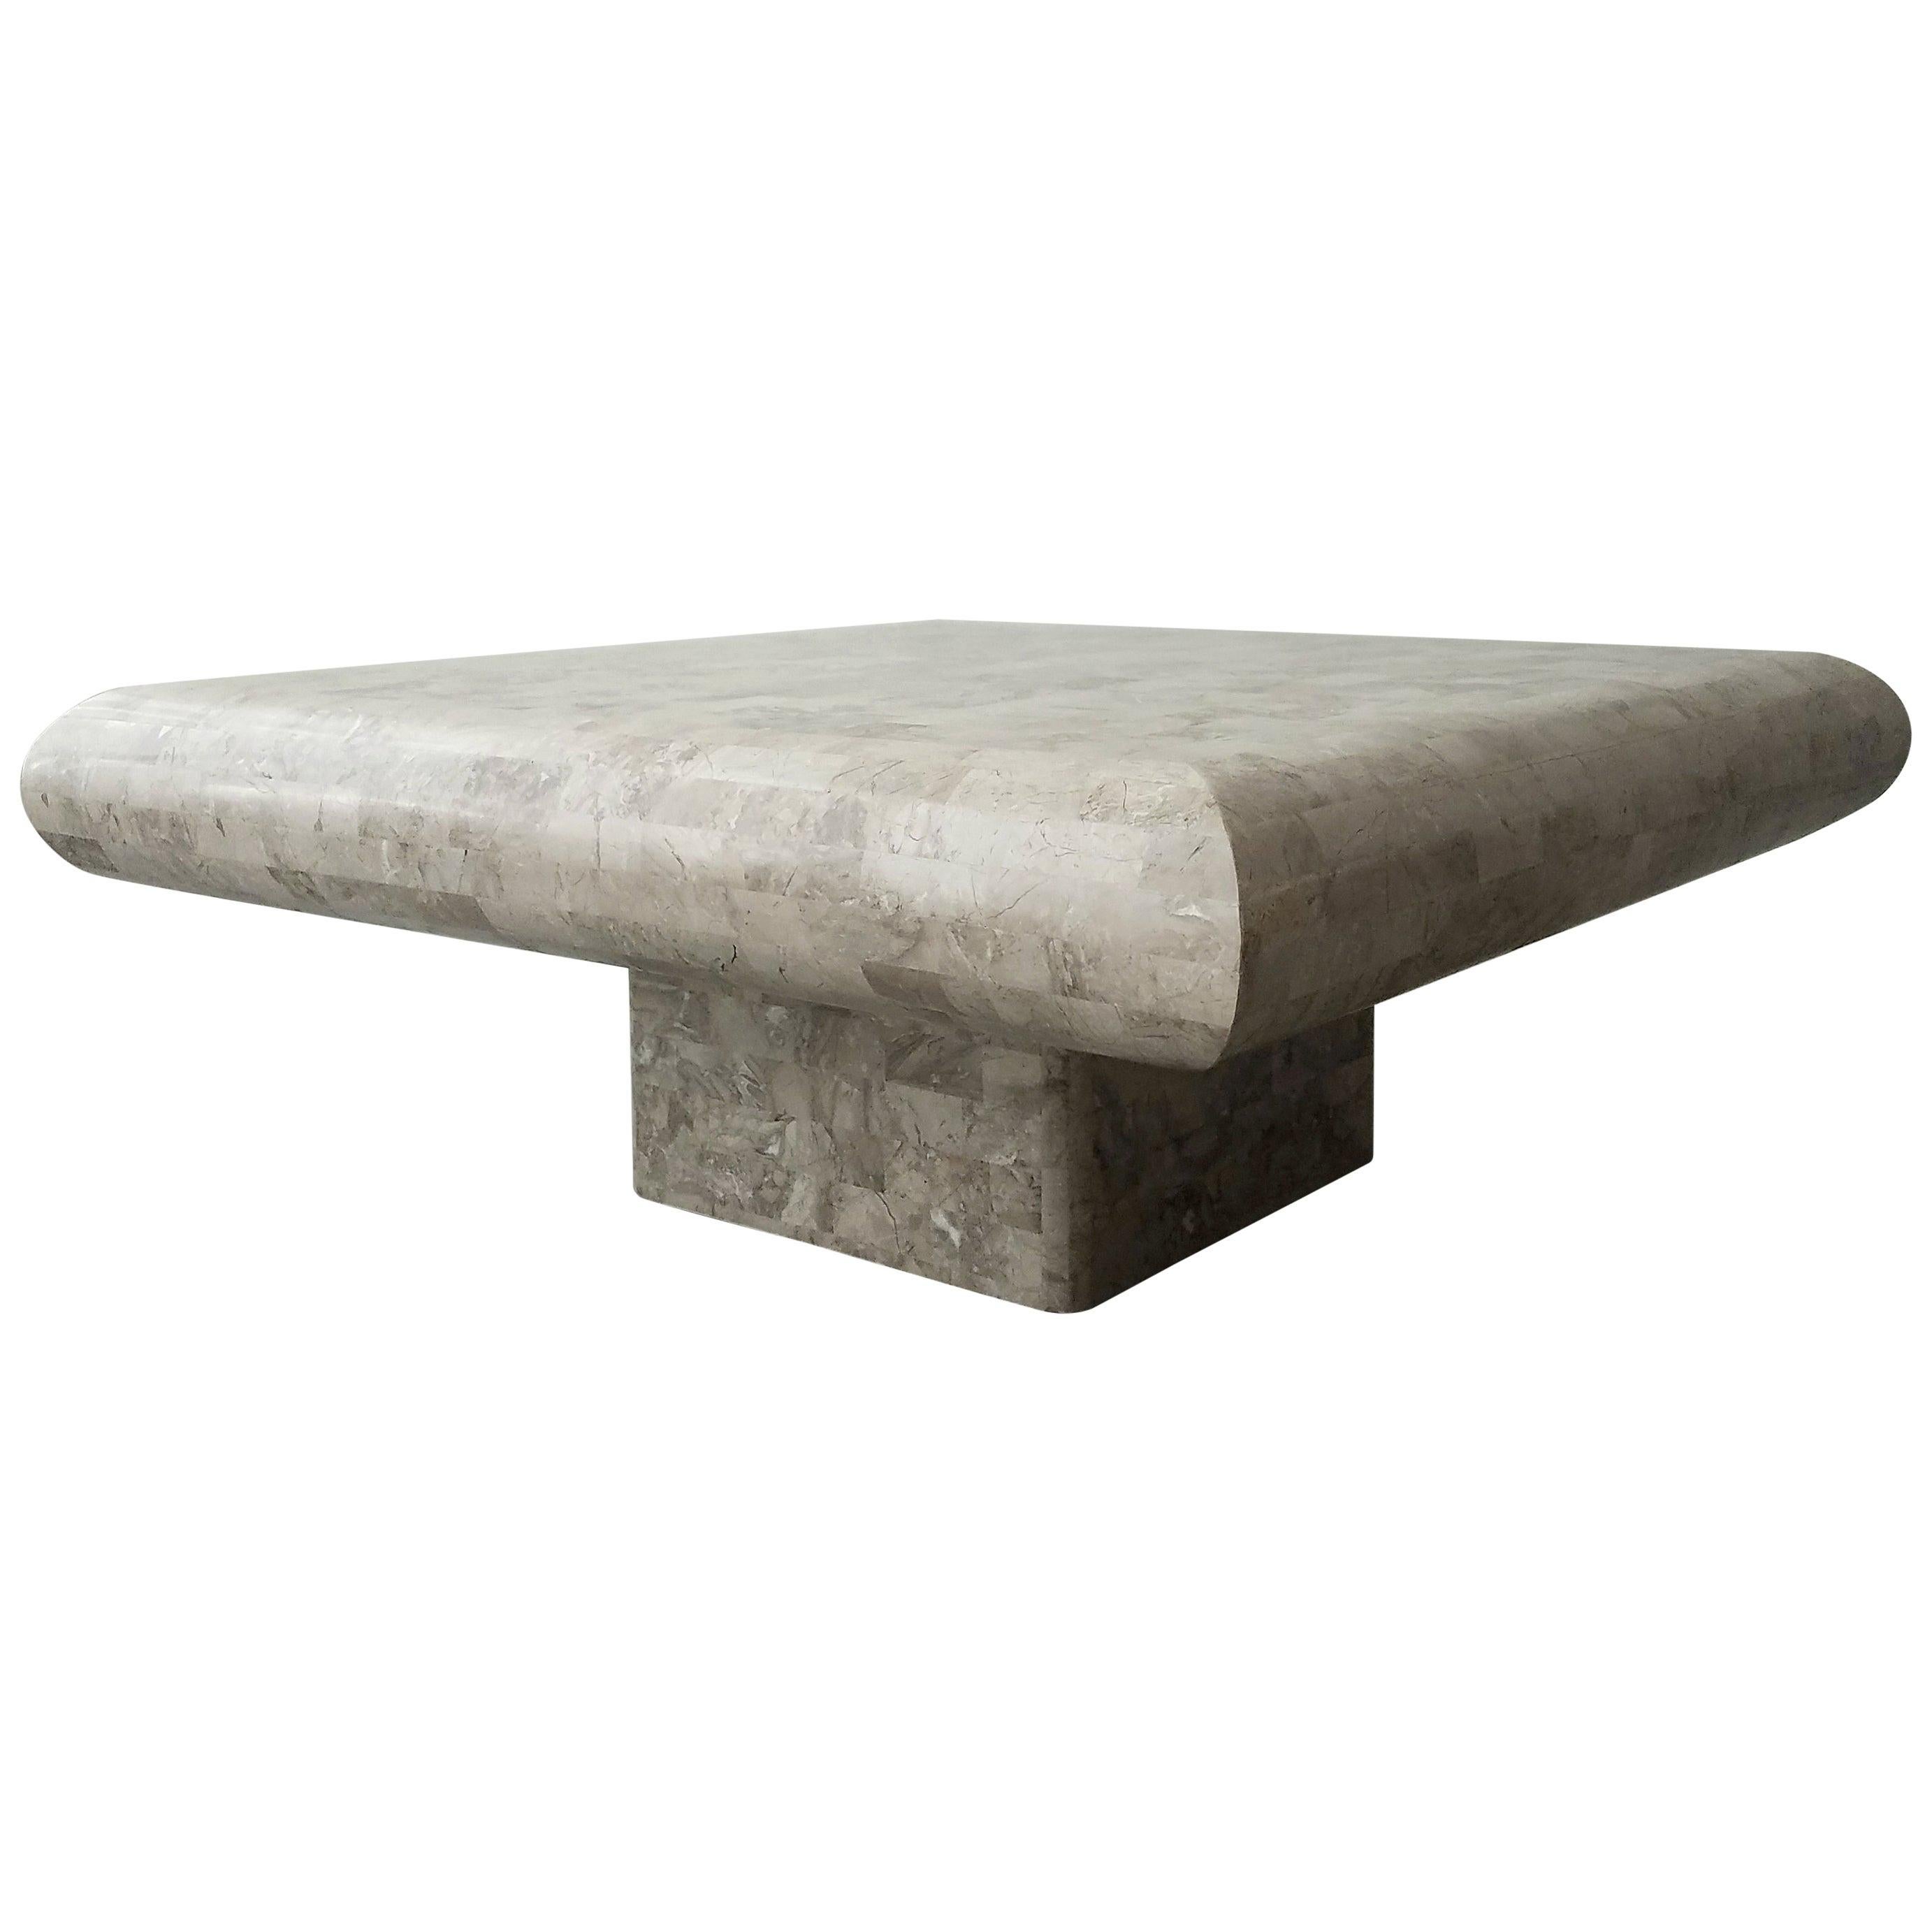 Tessellated Stone Square Pedestal Coffee Table by Maitland Smith